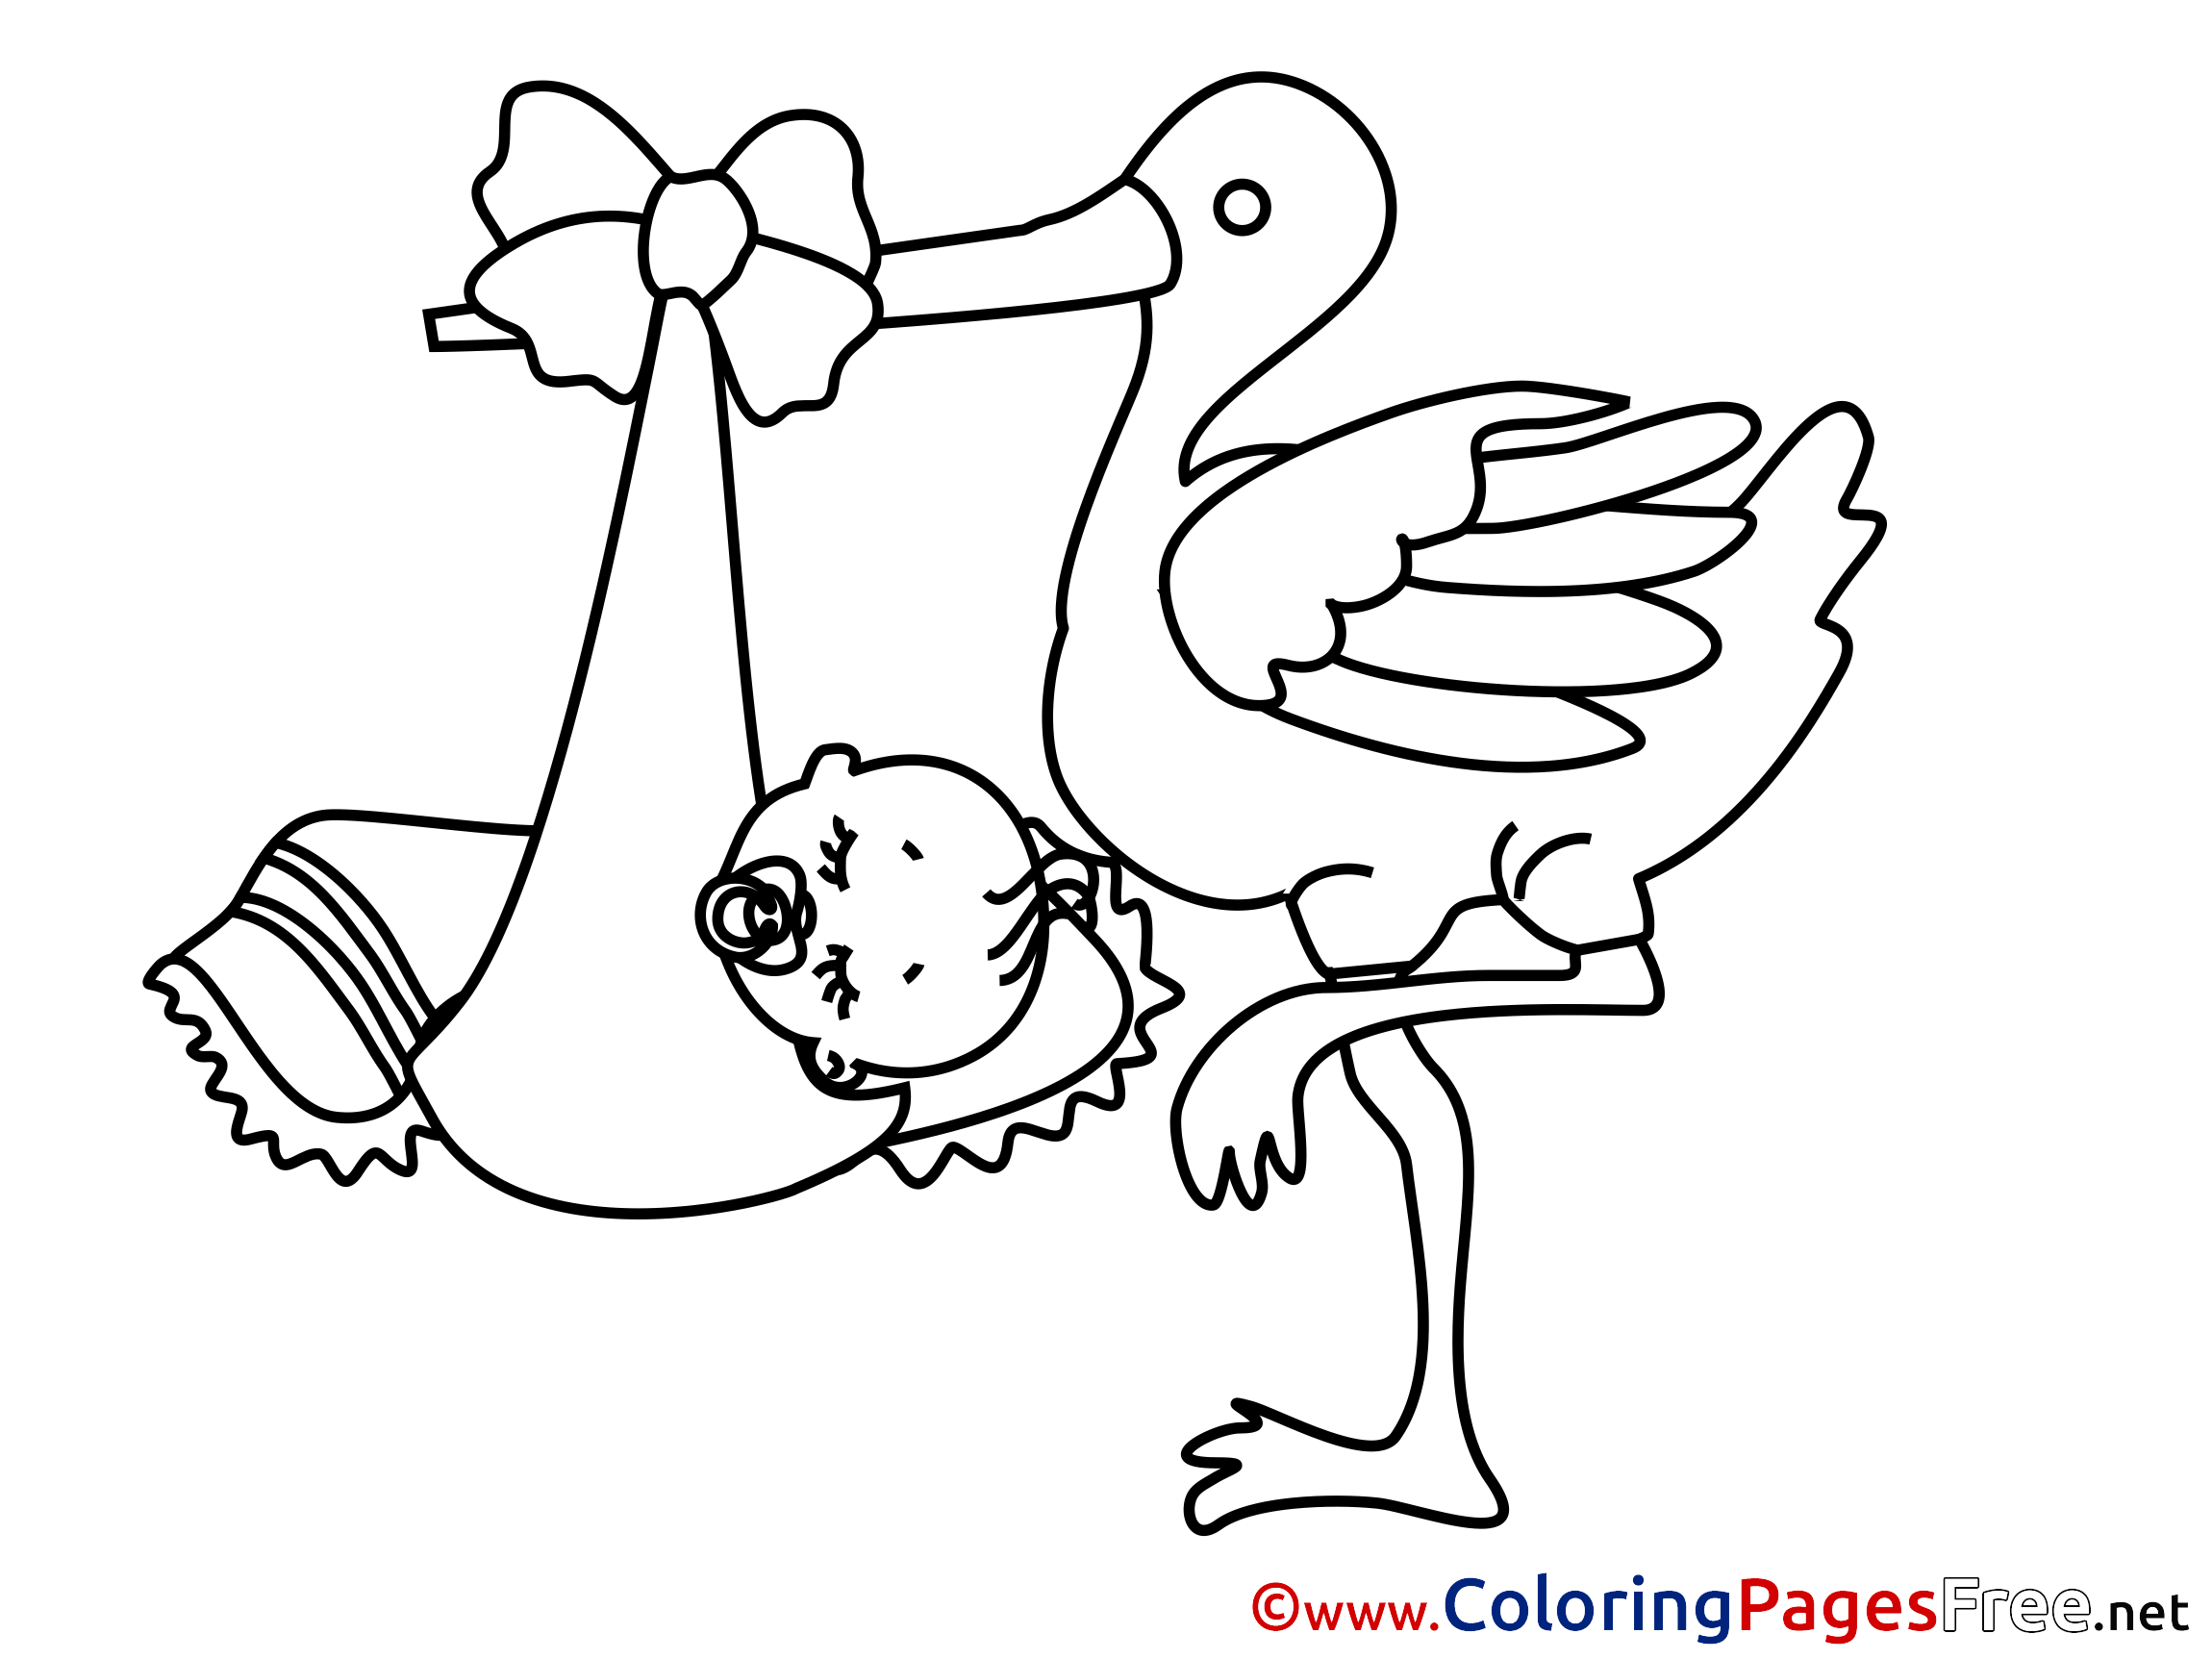 Stork for Children free Coloring Pagescoloringpagesfree.net